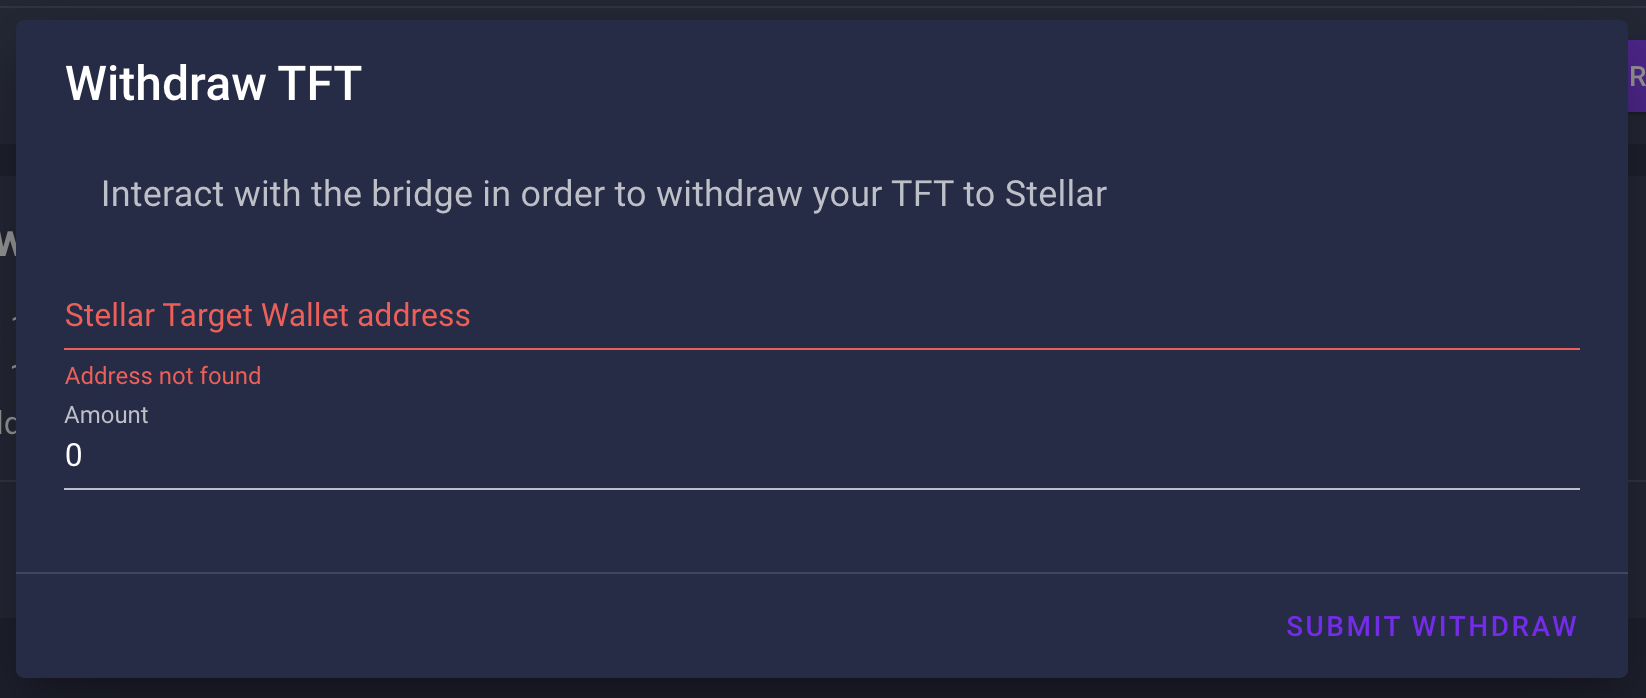 tf_chain_withdraw